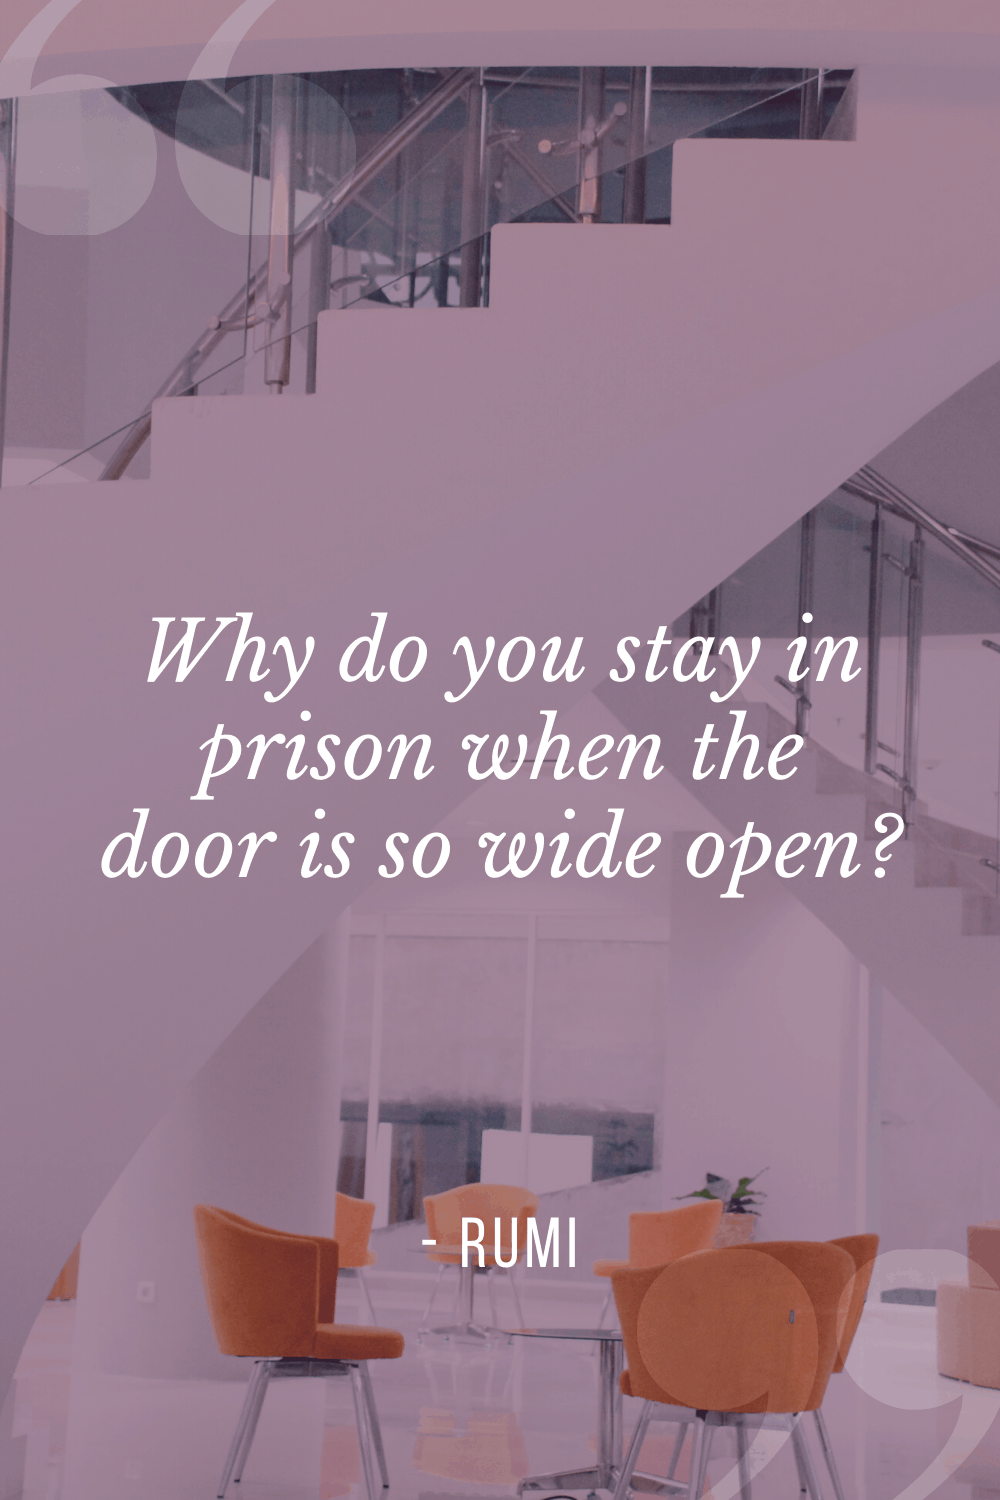 “Why do you stay in prison when the door is so wide open?”, Rumi